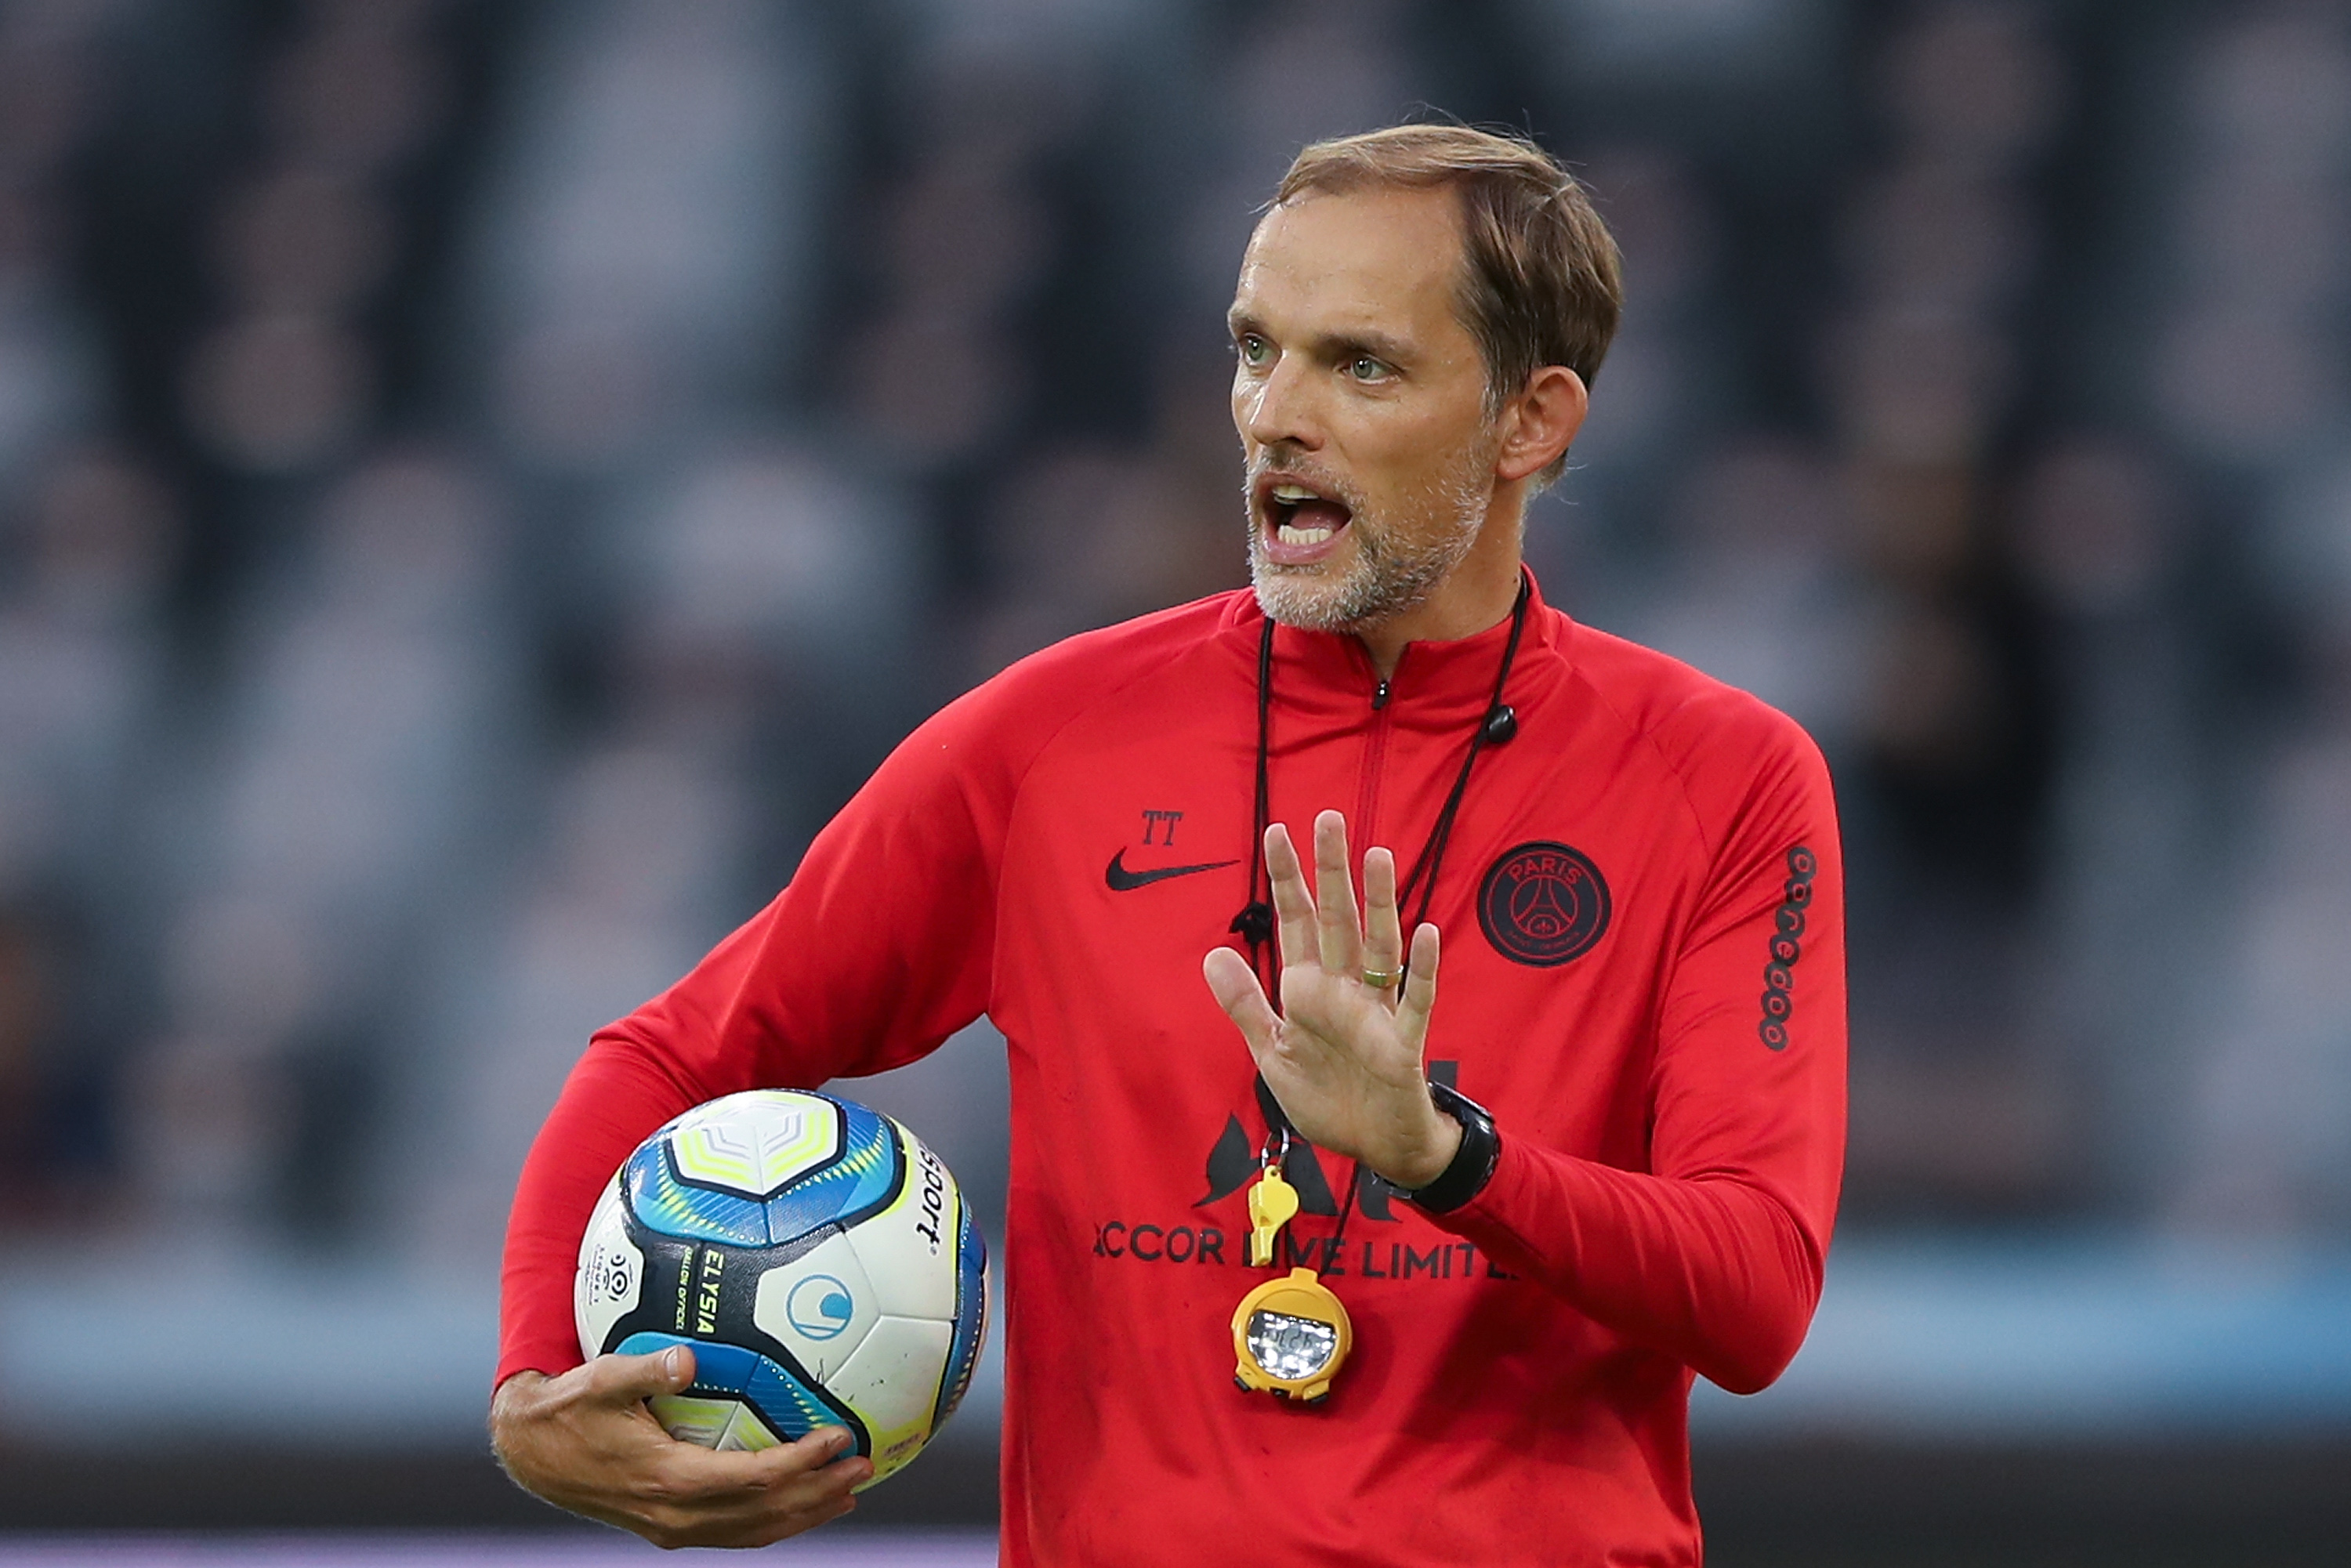 SHENZHEN, CHINA - AUGUST 02:  Head coach Thomas Tuchel of Paris Saint-Germain gestures during the training session ahead of the French Trophy of Champions football match between Rennes and Paris Saint-Germain at Shenzhen Universiadg Sports Center stadium on August 2, 2019 in Shenzhen, China.  (Photo by Lintao Zhang/Getty Images)